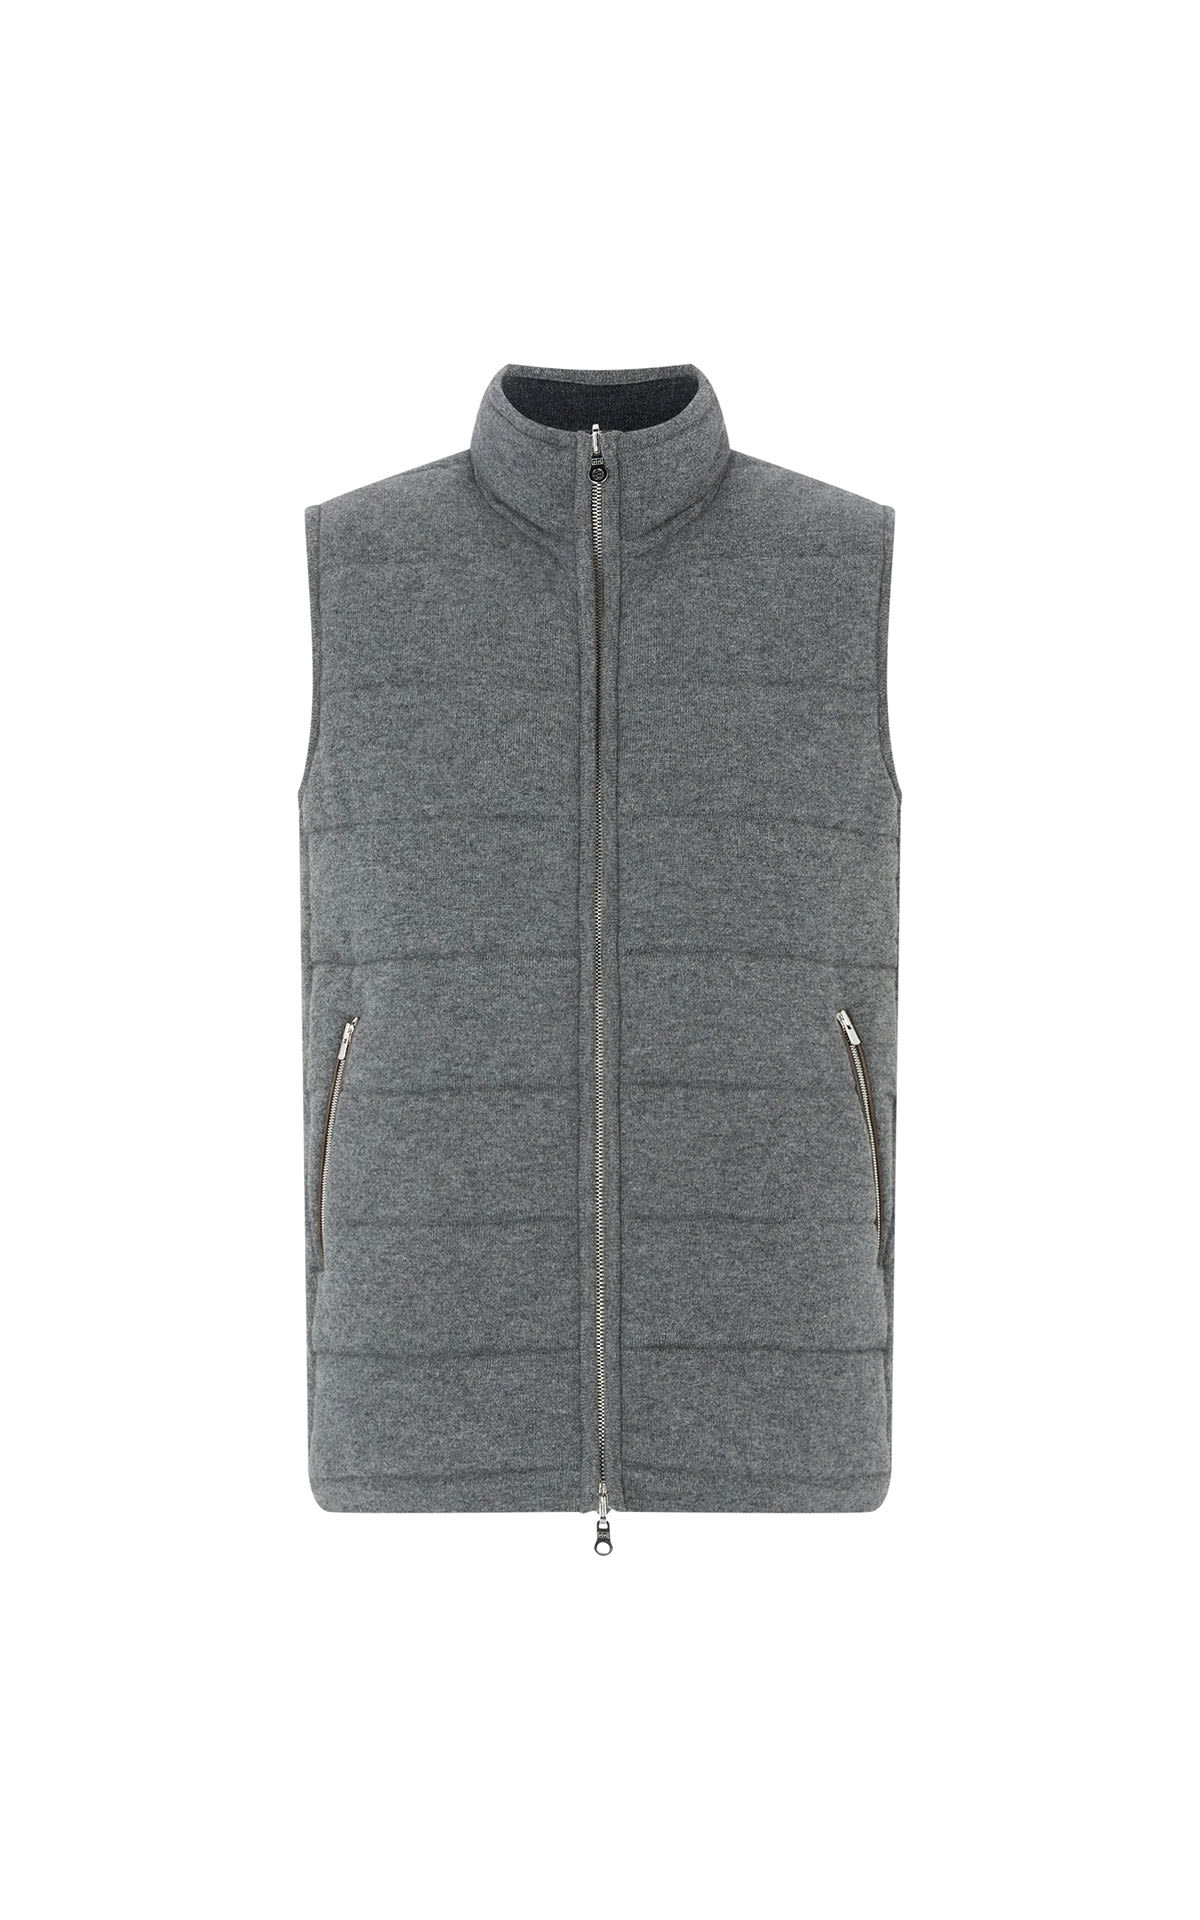 N. Peal The mall quilted cashmere gilet elephant grey from Bicester Village